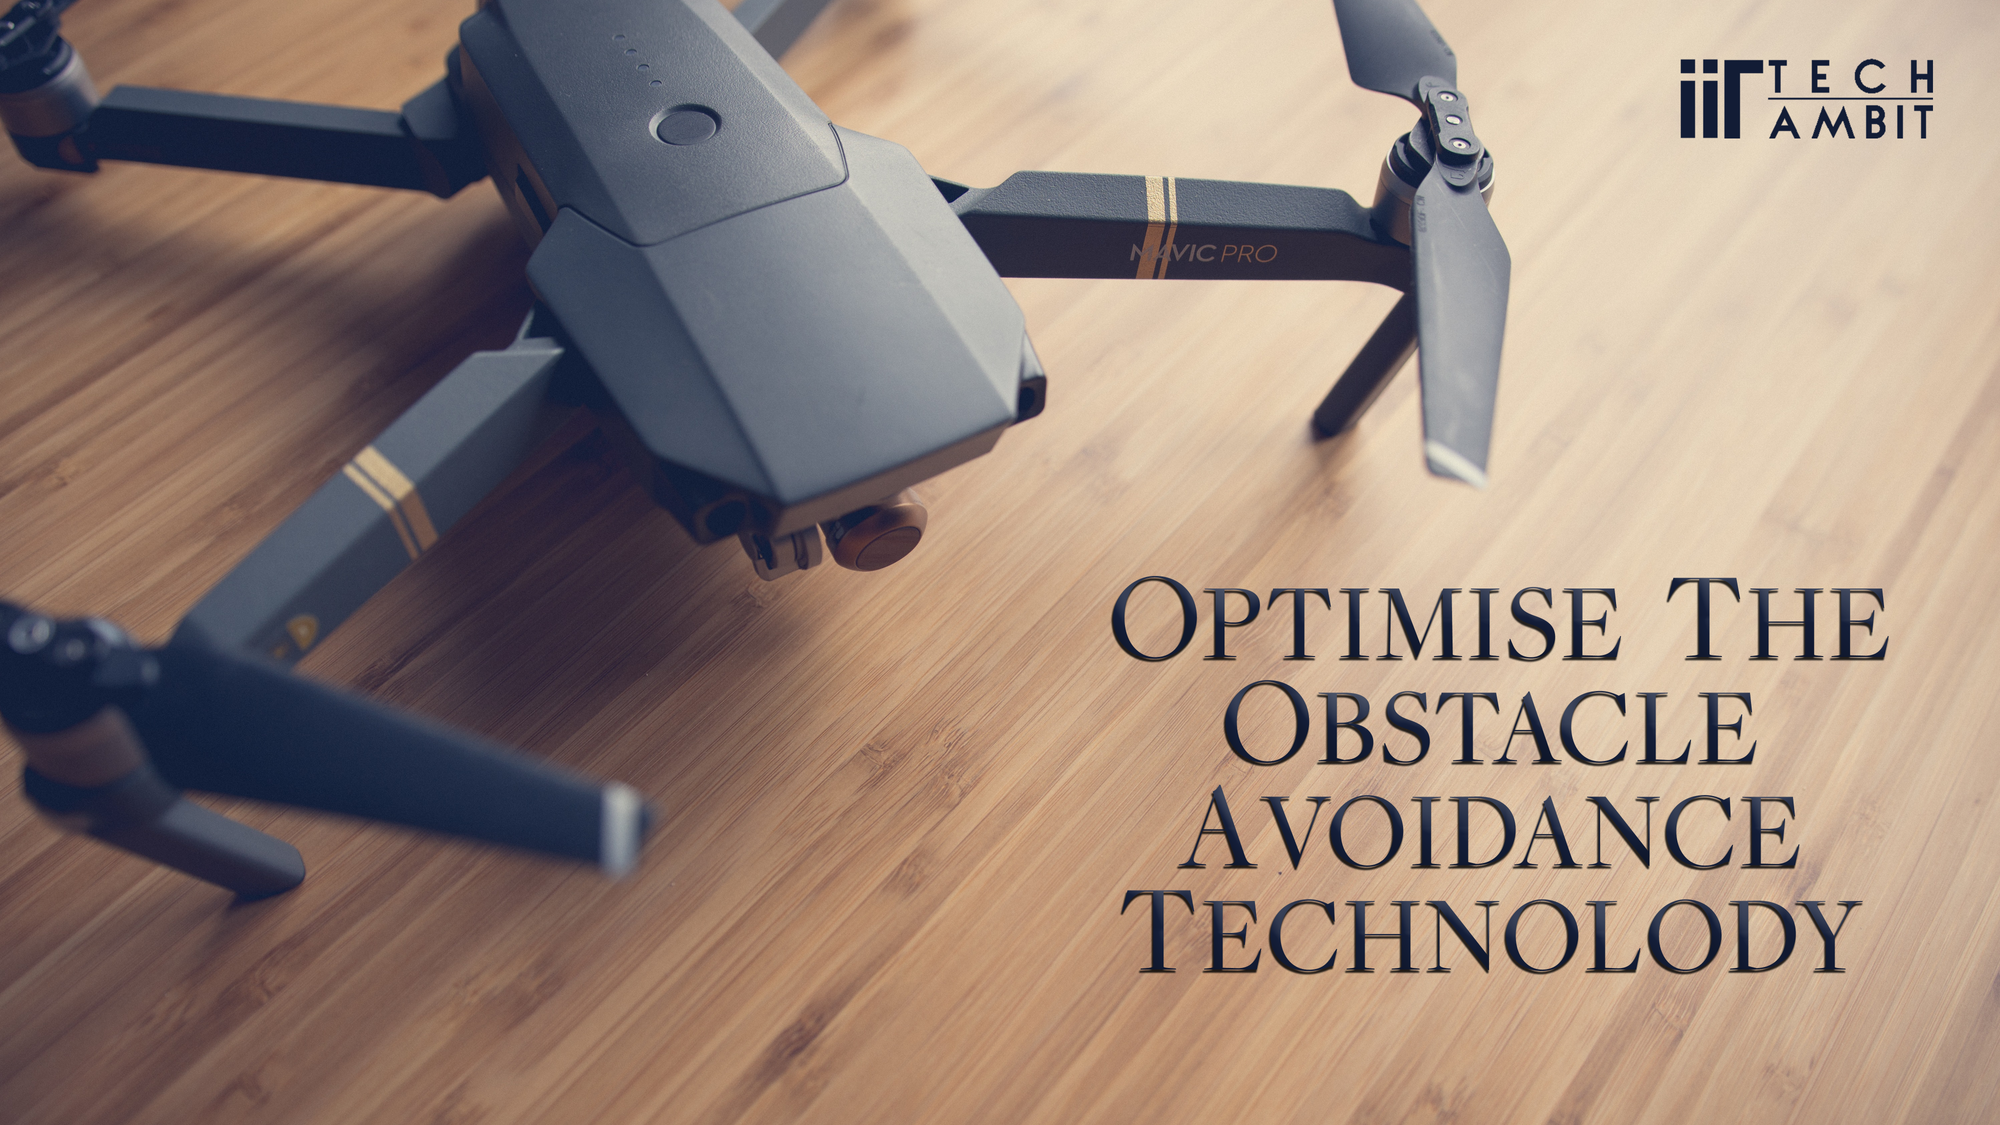 Optimize the Obstacle Avoidance Technology